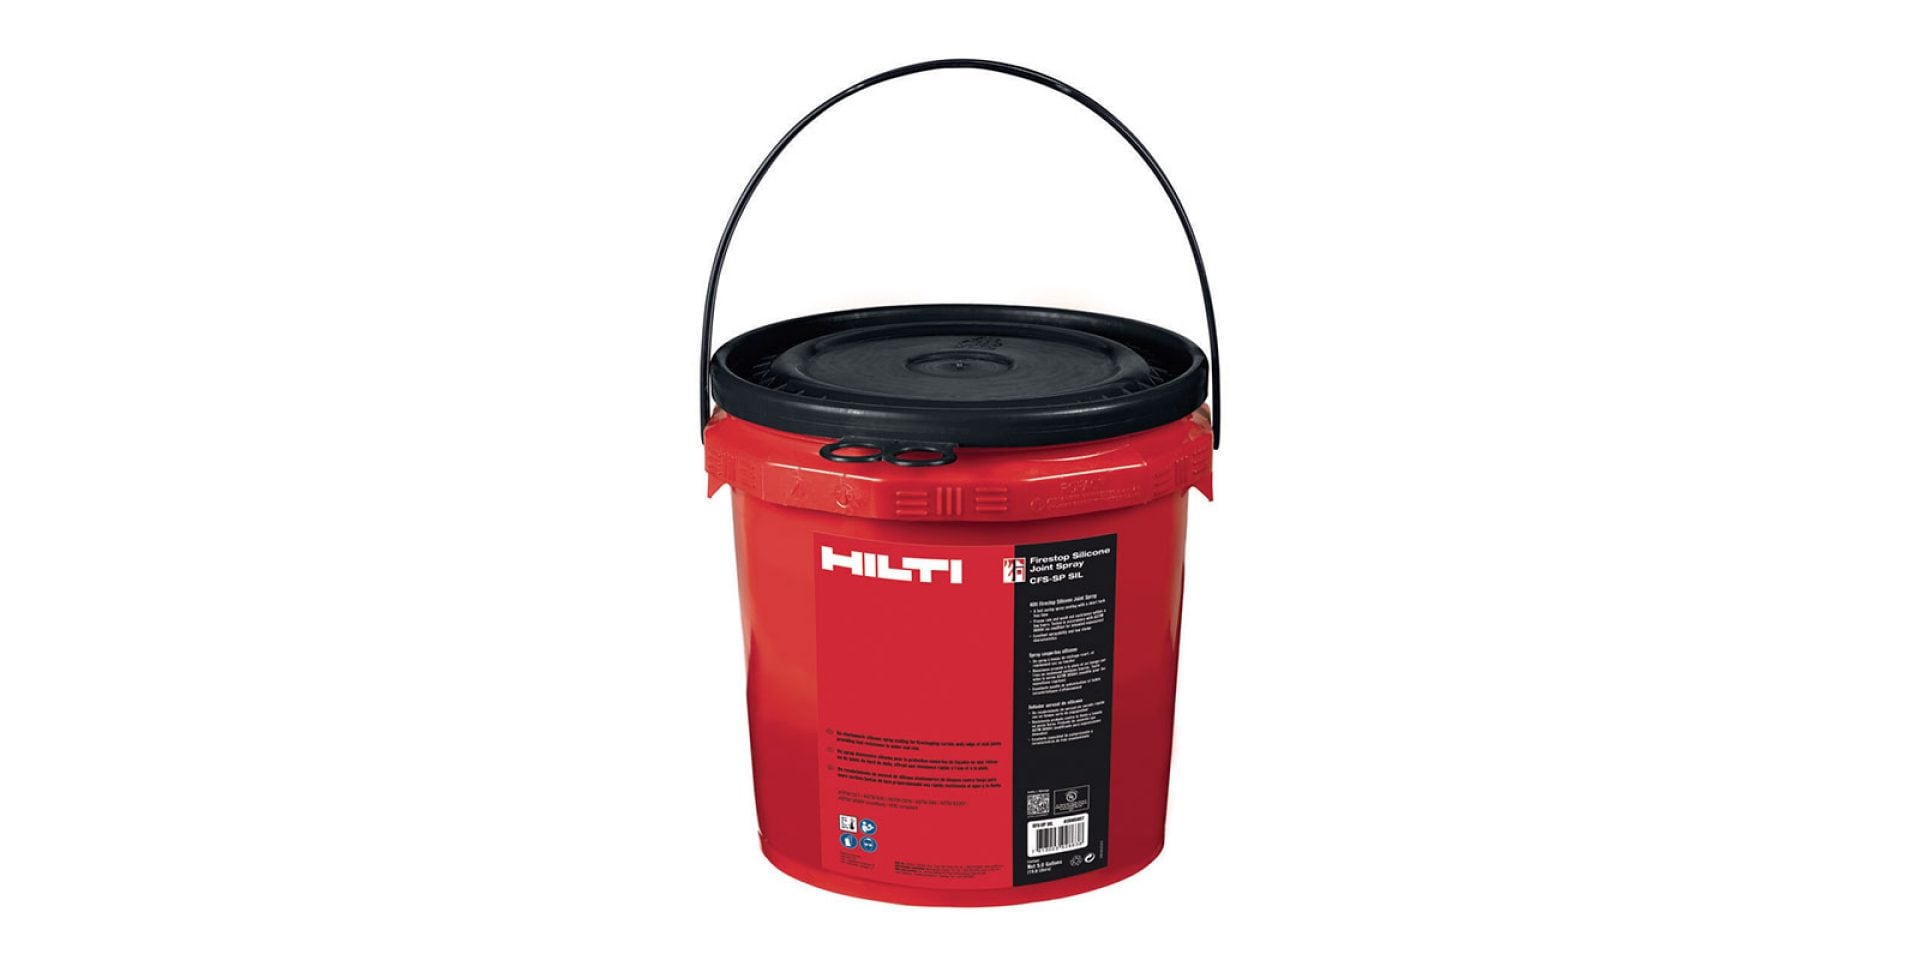 Hilti CFS-SP SIL Firestop Silicone joint spray